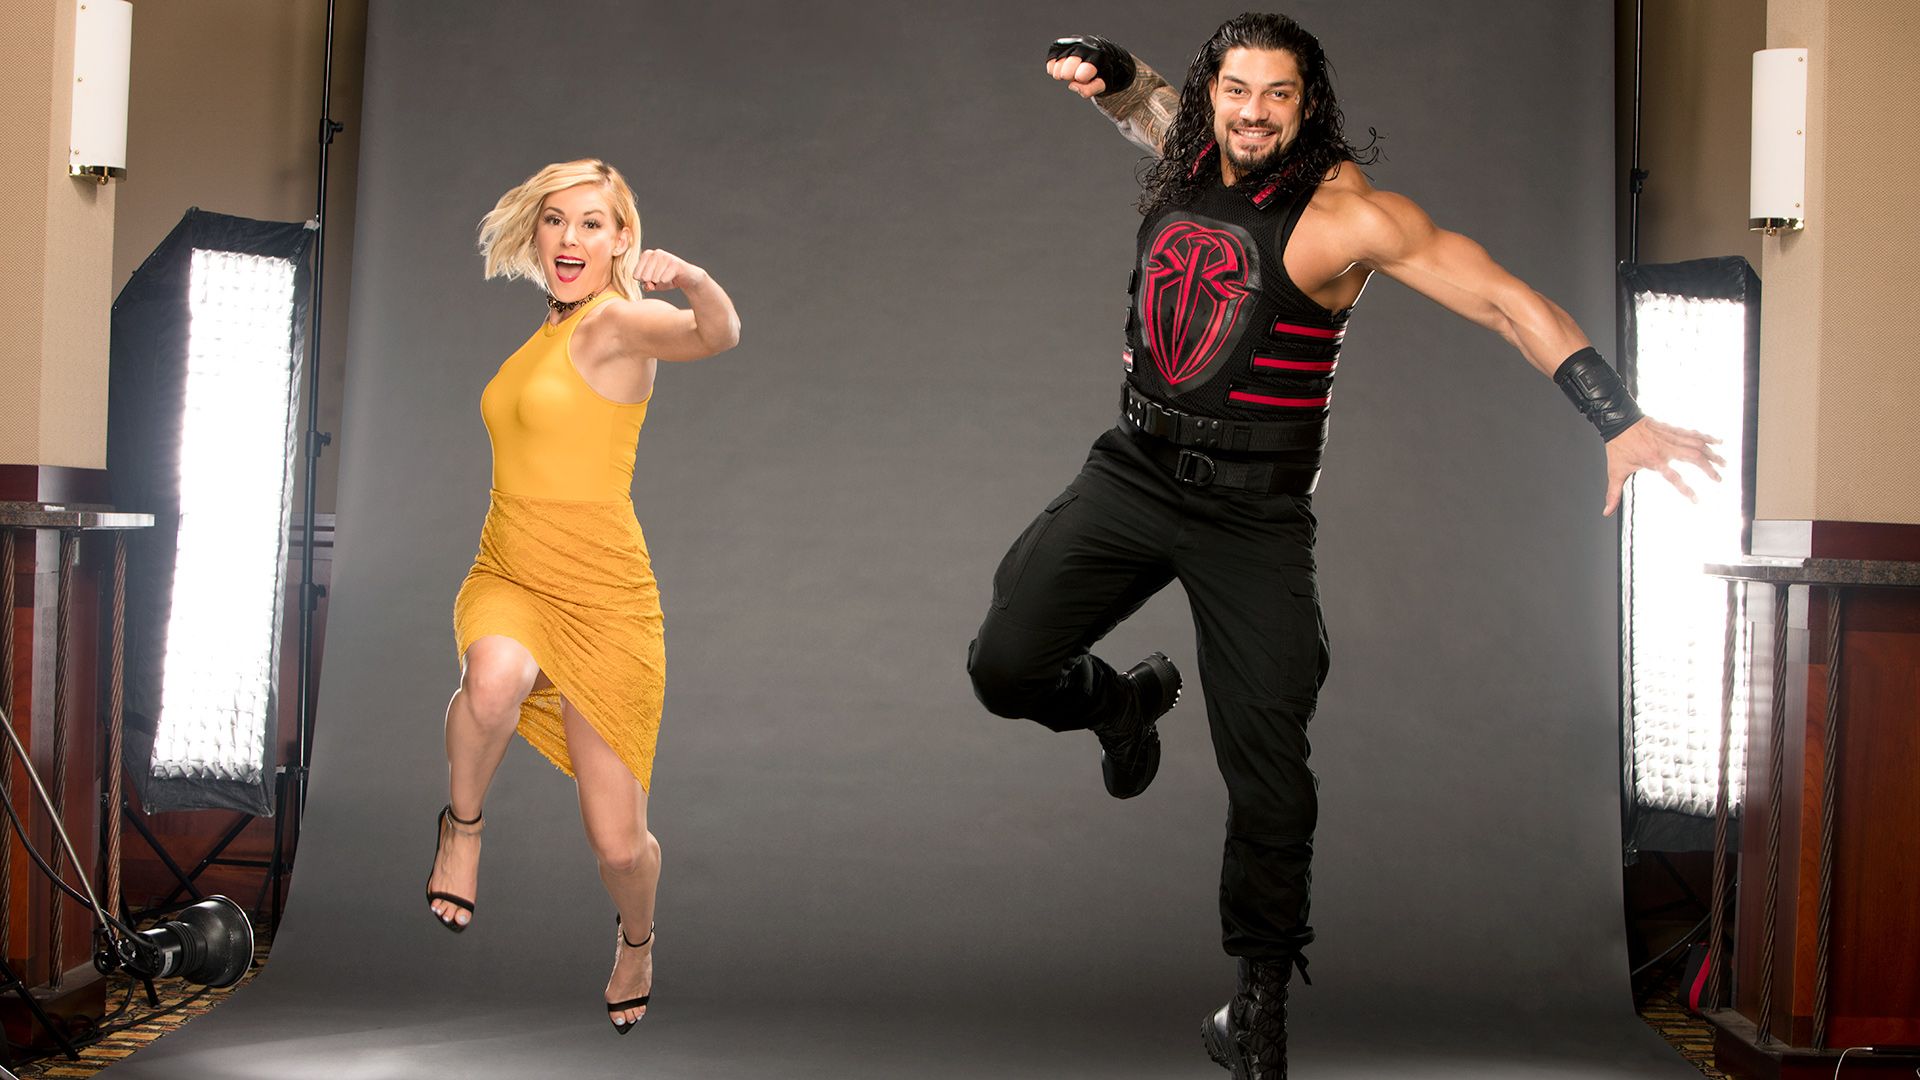 PsBattle: WWE's Roman Reigns & Renee Young poses for a Superman Punch